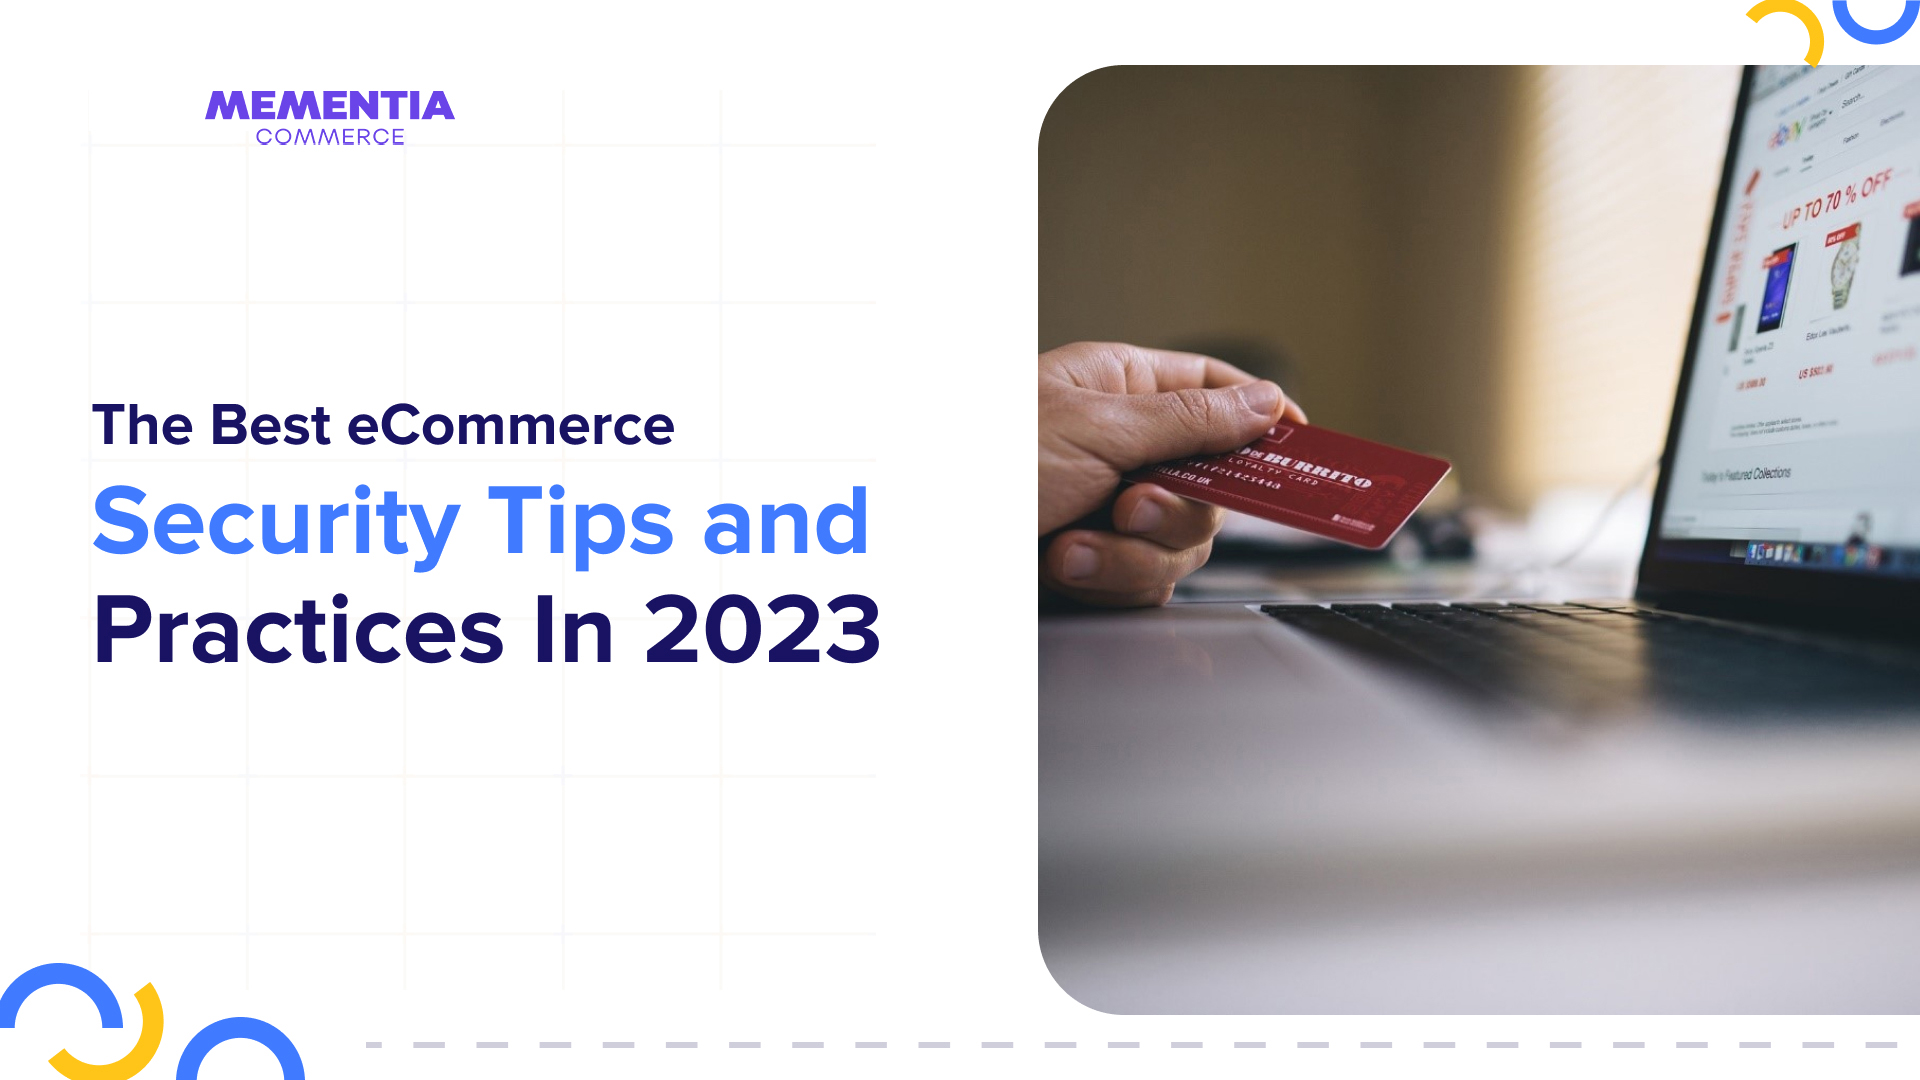 Proven eCommerce Security Tips For Your Online Store in 2023